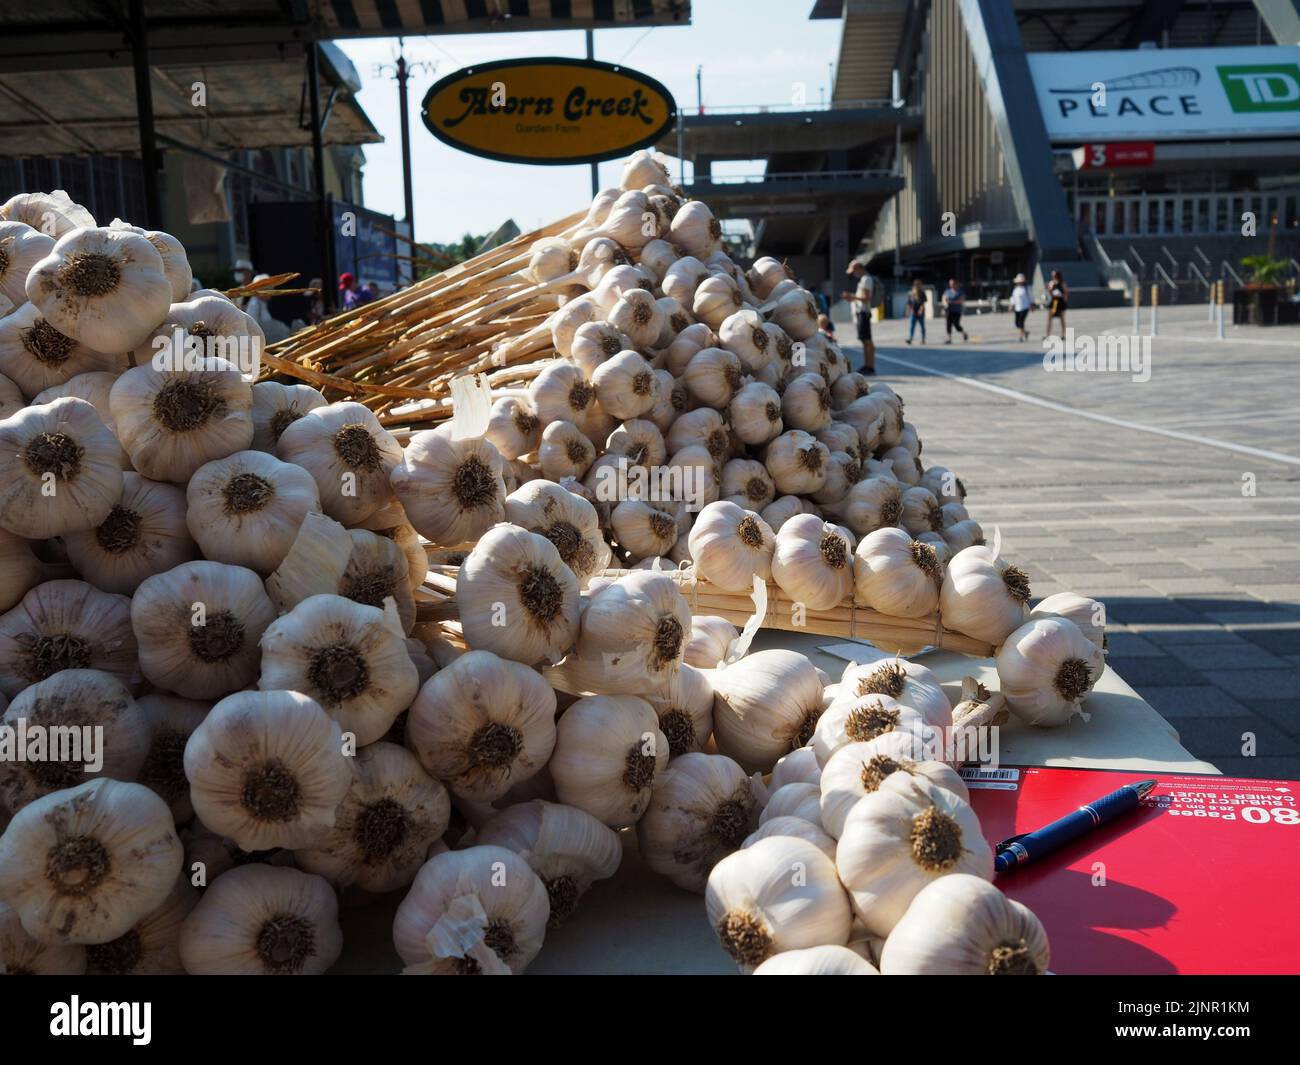 Scenes from the Farmer's Market at Lansdowne Place. Piles of fresh garlic on a trestle table. Ottawa, ON, Canada, Stock Photo